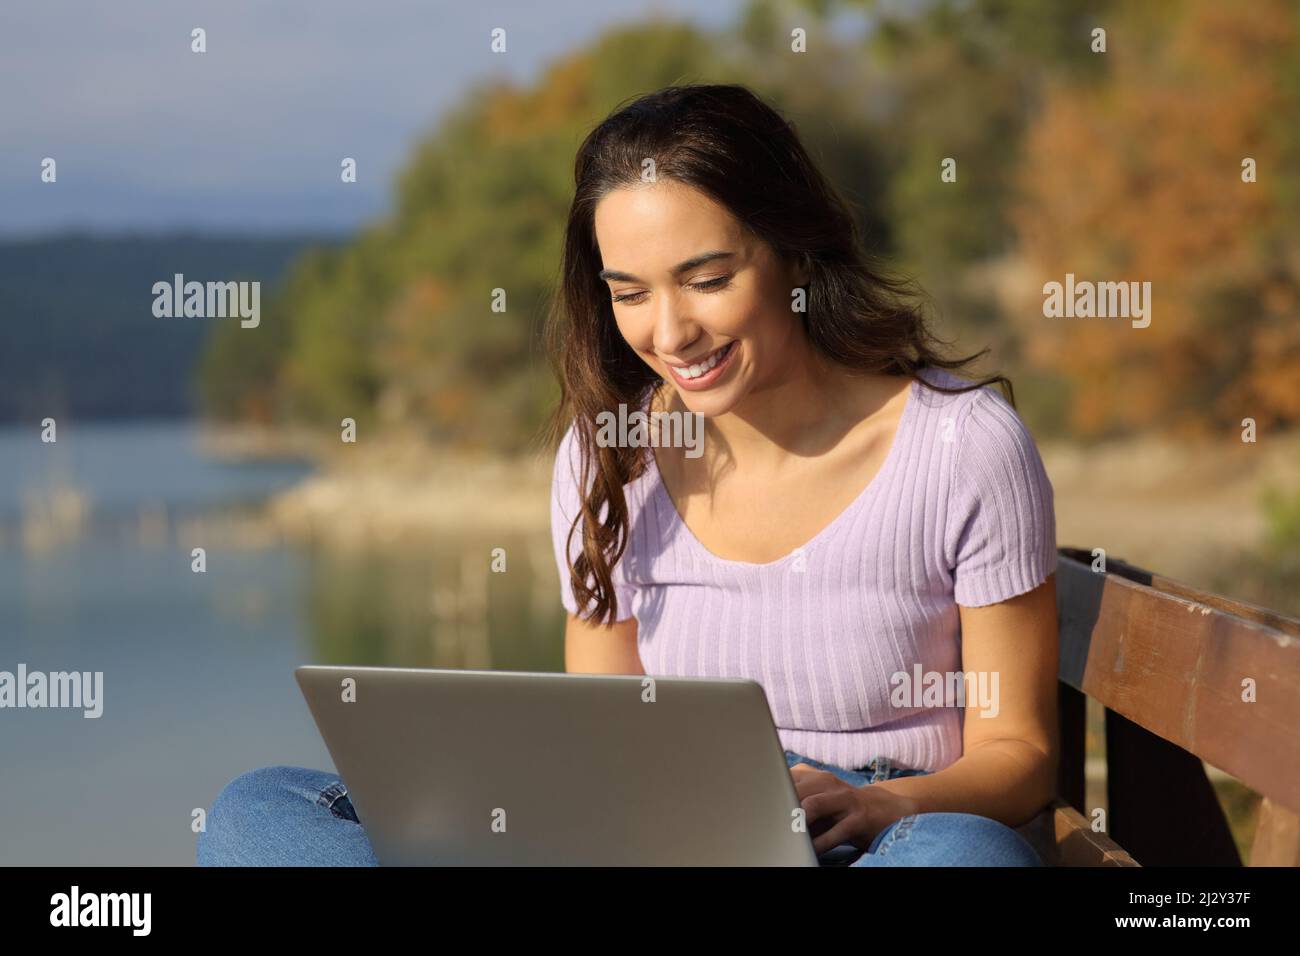 Happy woman using a laptop sitting in a lake on holiday a sunny day Stock Photo